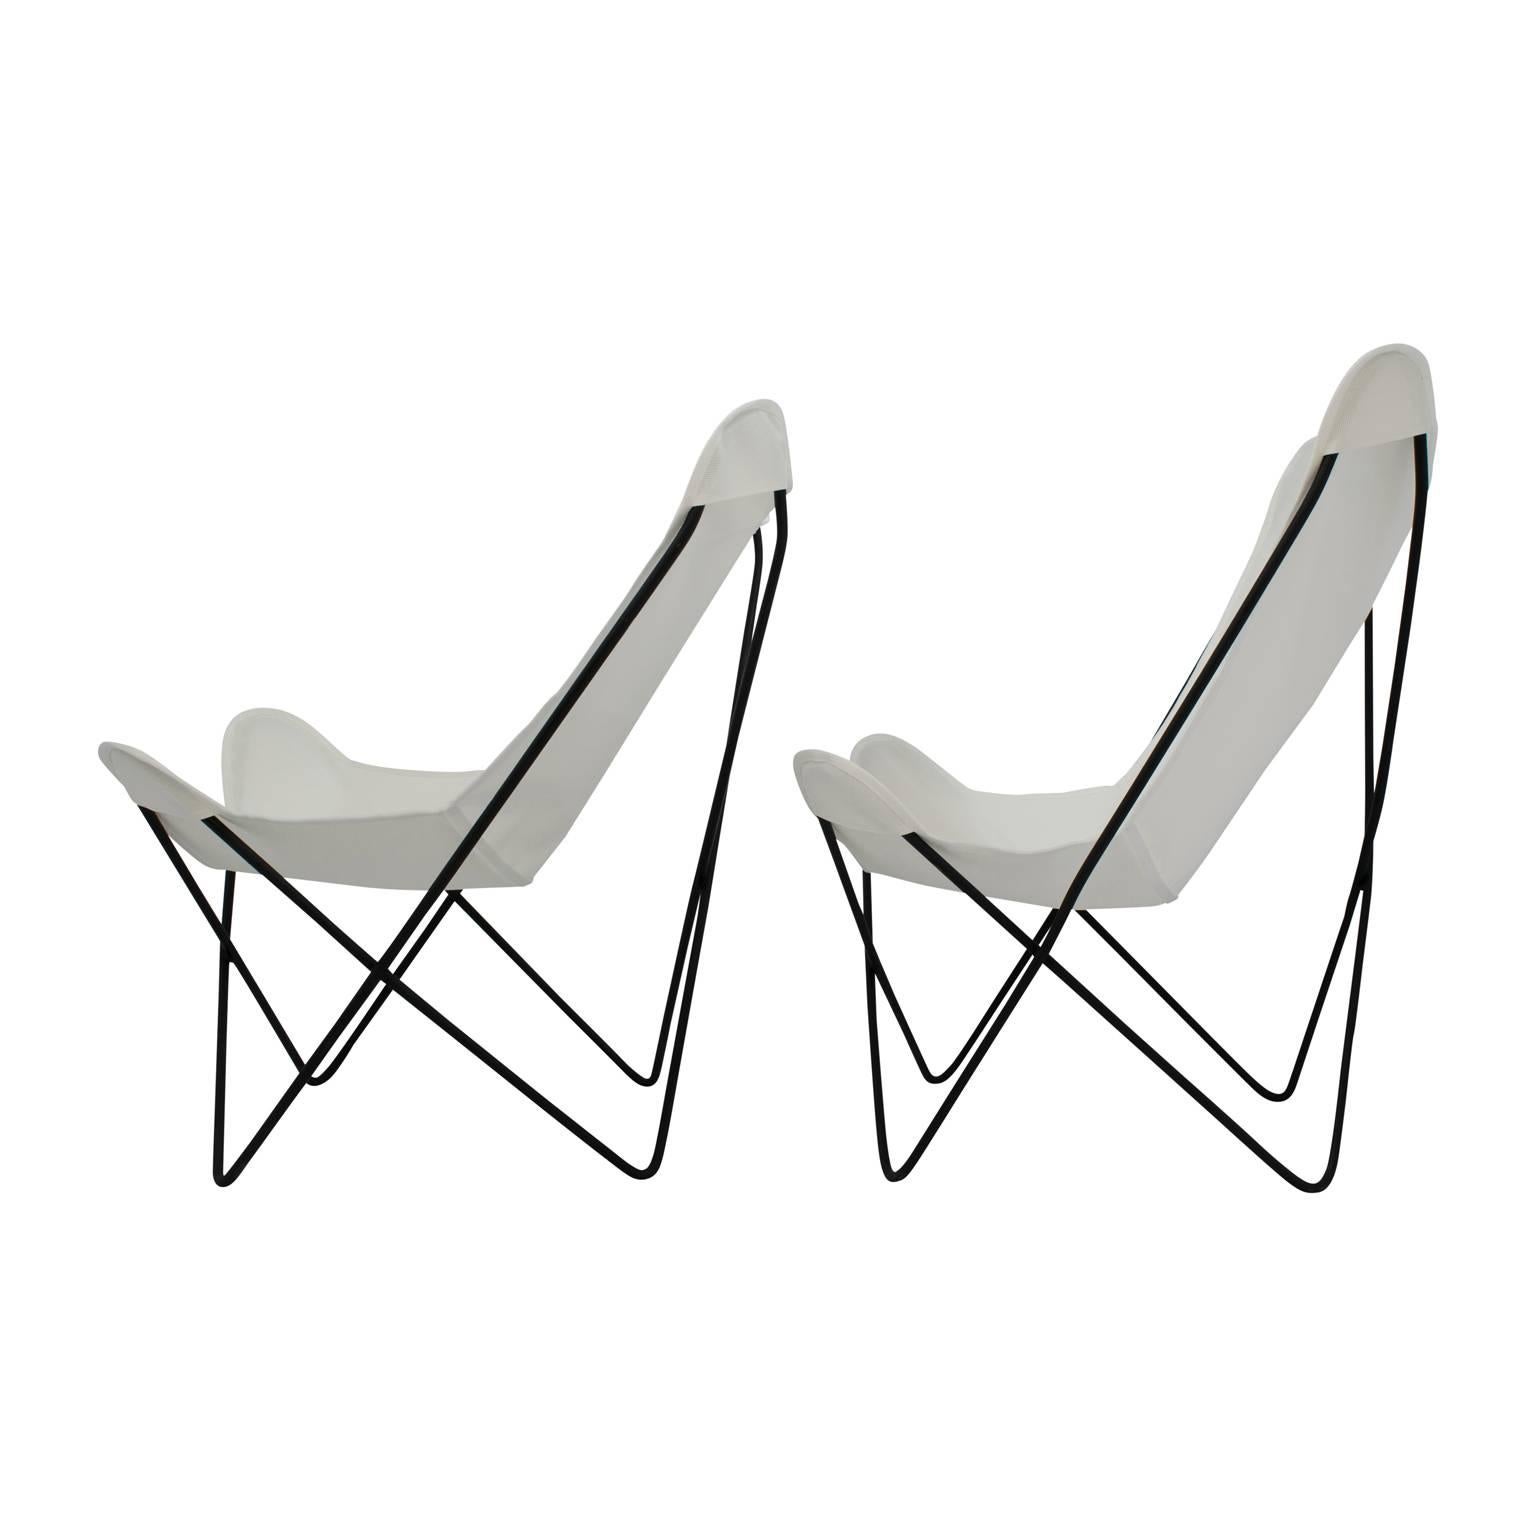 Two vintage butterfly chairs with new white slings, in the style of Jorge Ferrari Hardoy for Knoll. The butterfly chairs have welded iron frames with a matte black finish. These Mid-Century chairs can be used indoors or outdoors, and they can be